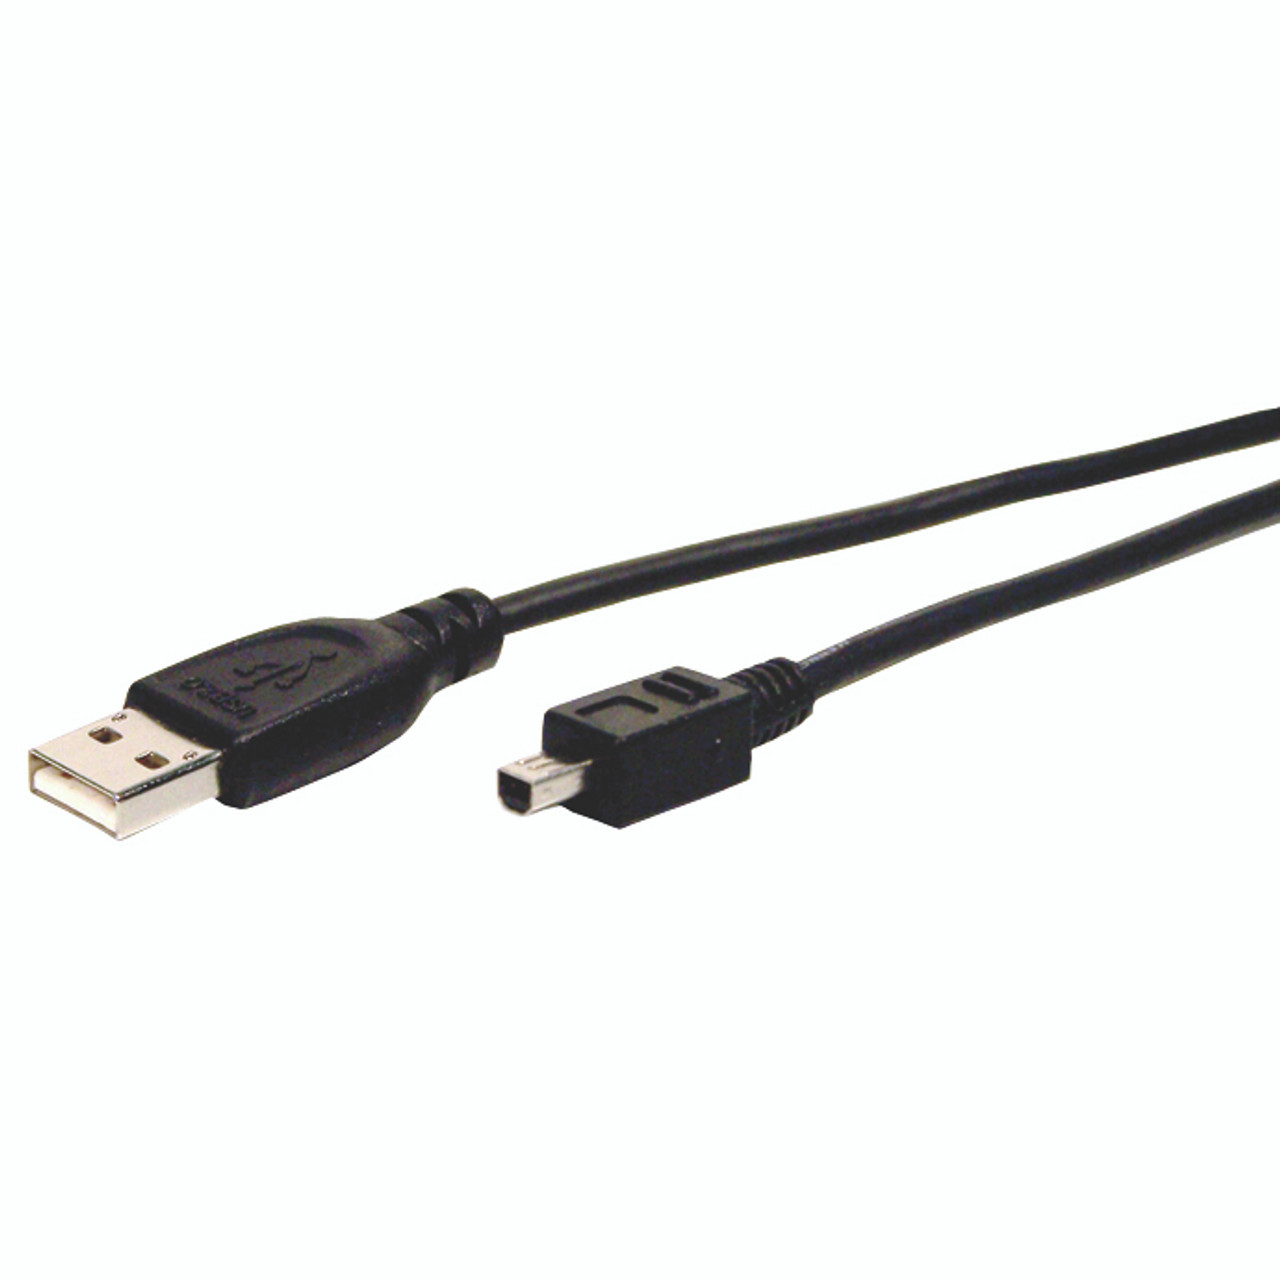 USB 2.0 A to mini 4 pin Cable 25ft.